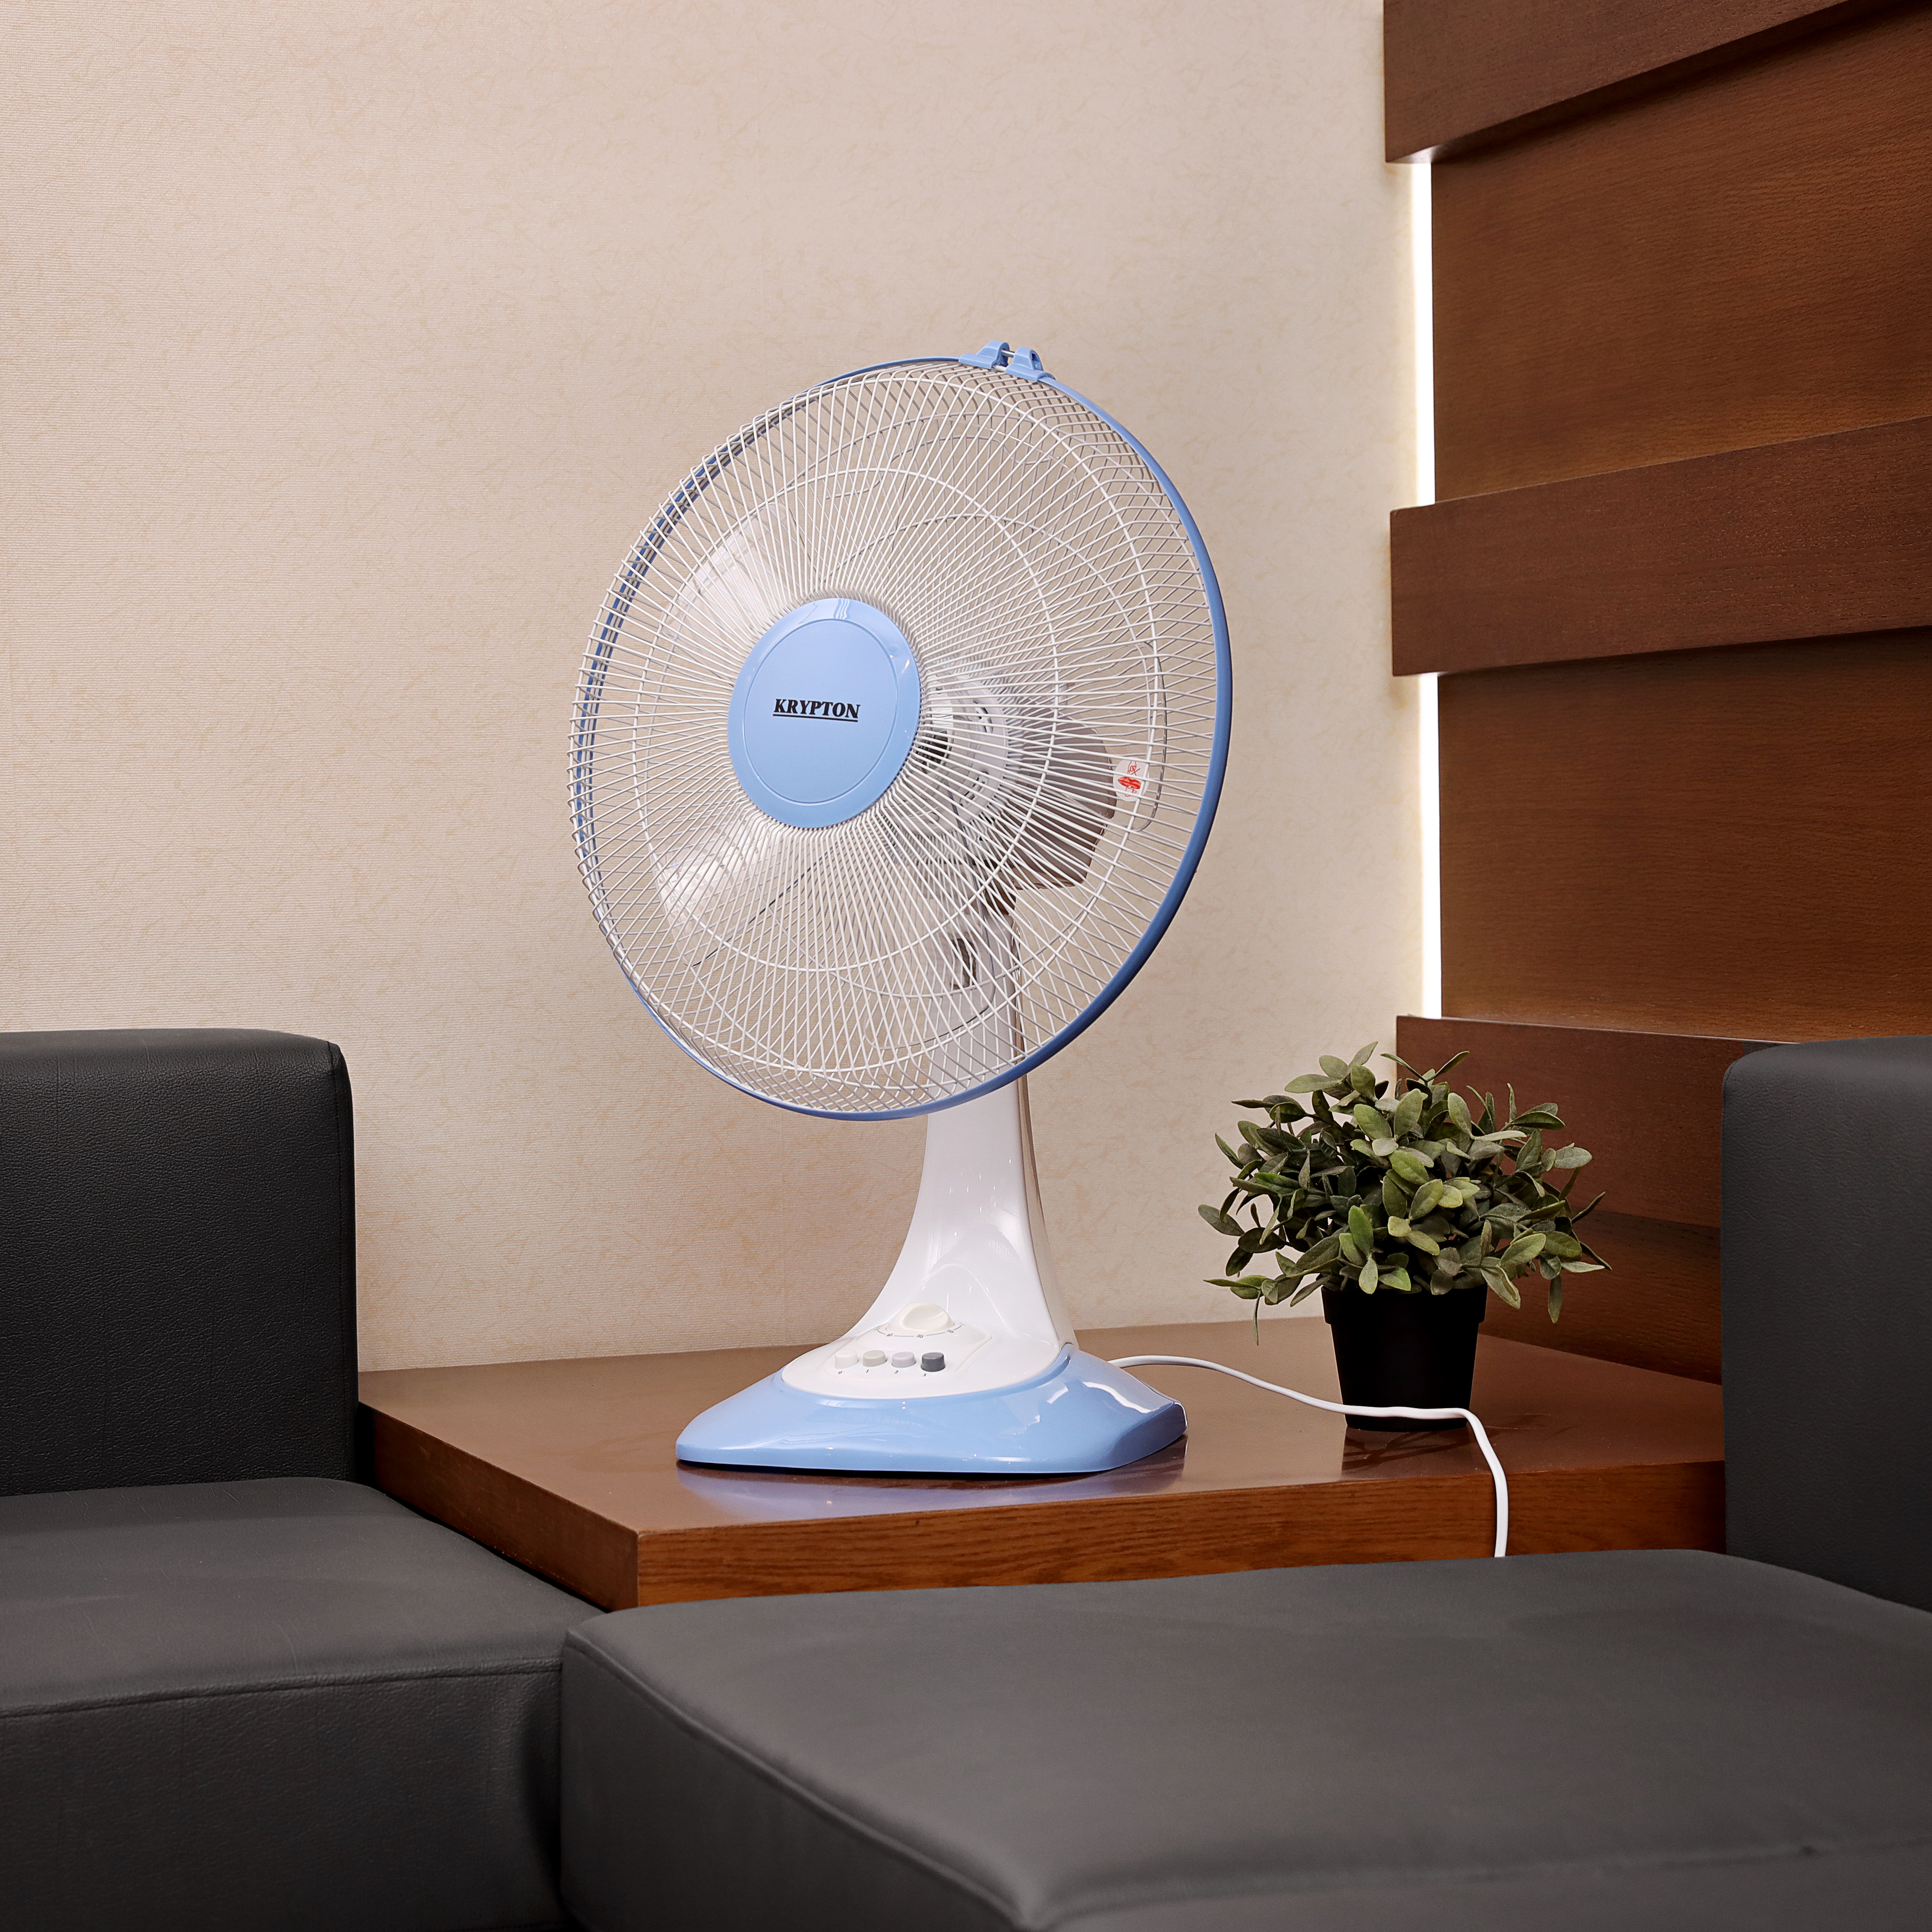 G4GADGET White 3 In 1 Adjustable 16 Inch Fan Suitable For All Situations Wall Mounted Floor Standing Desk 16 3 in 1 Fan. 